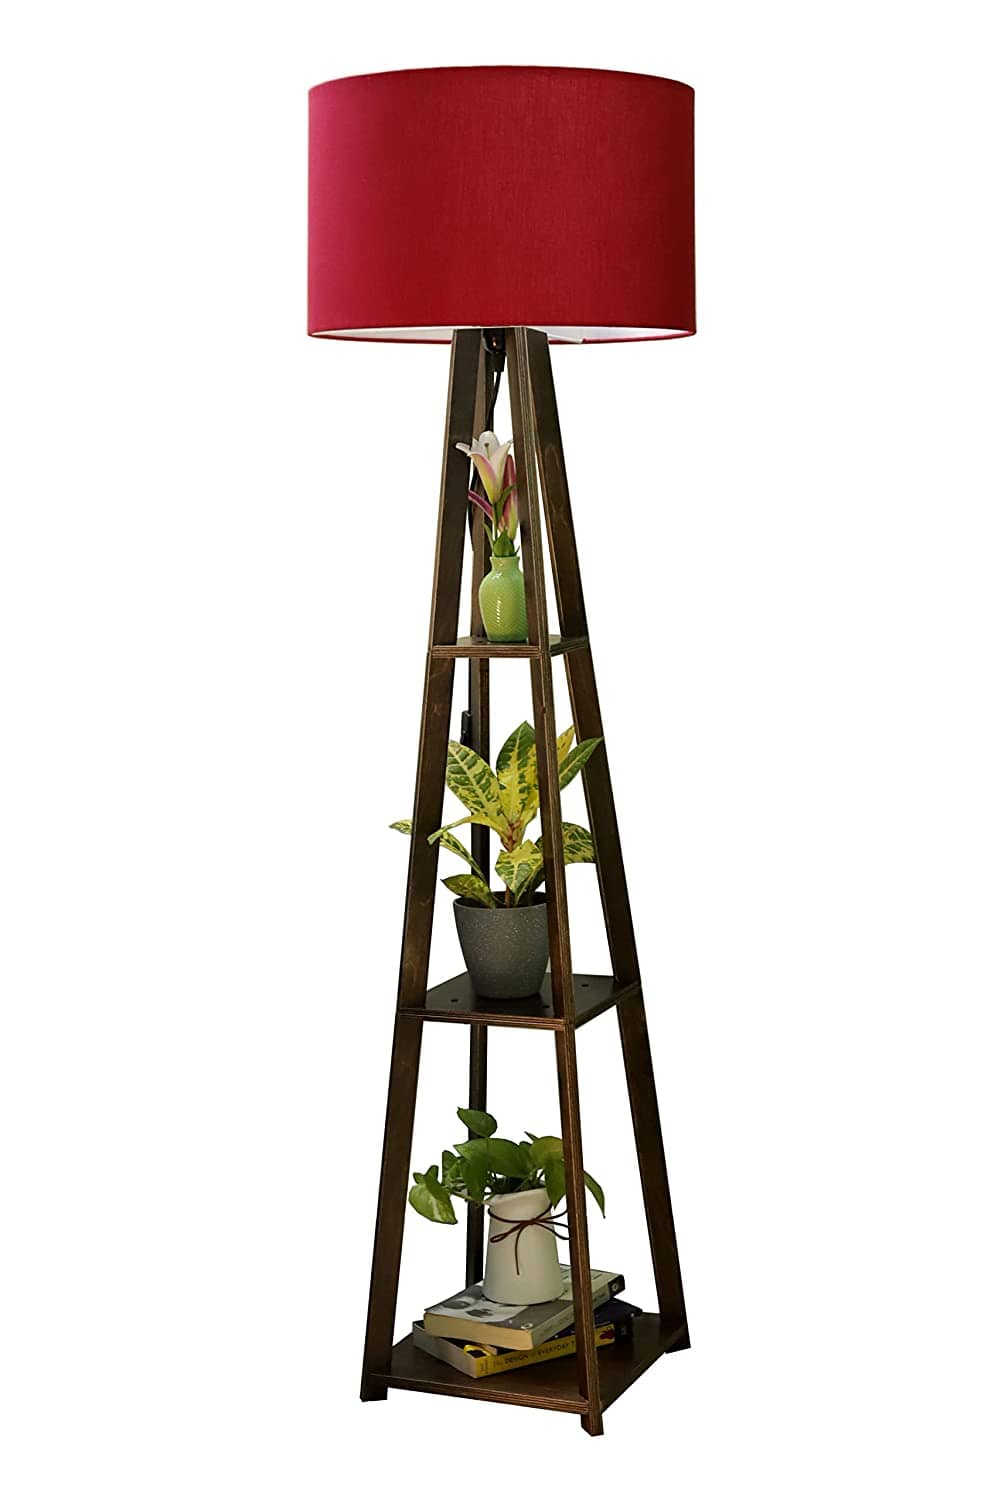 Floor lamp in All New Fresh Colors.